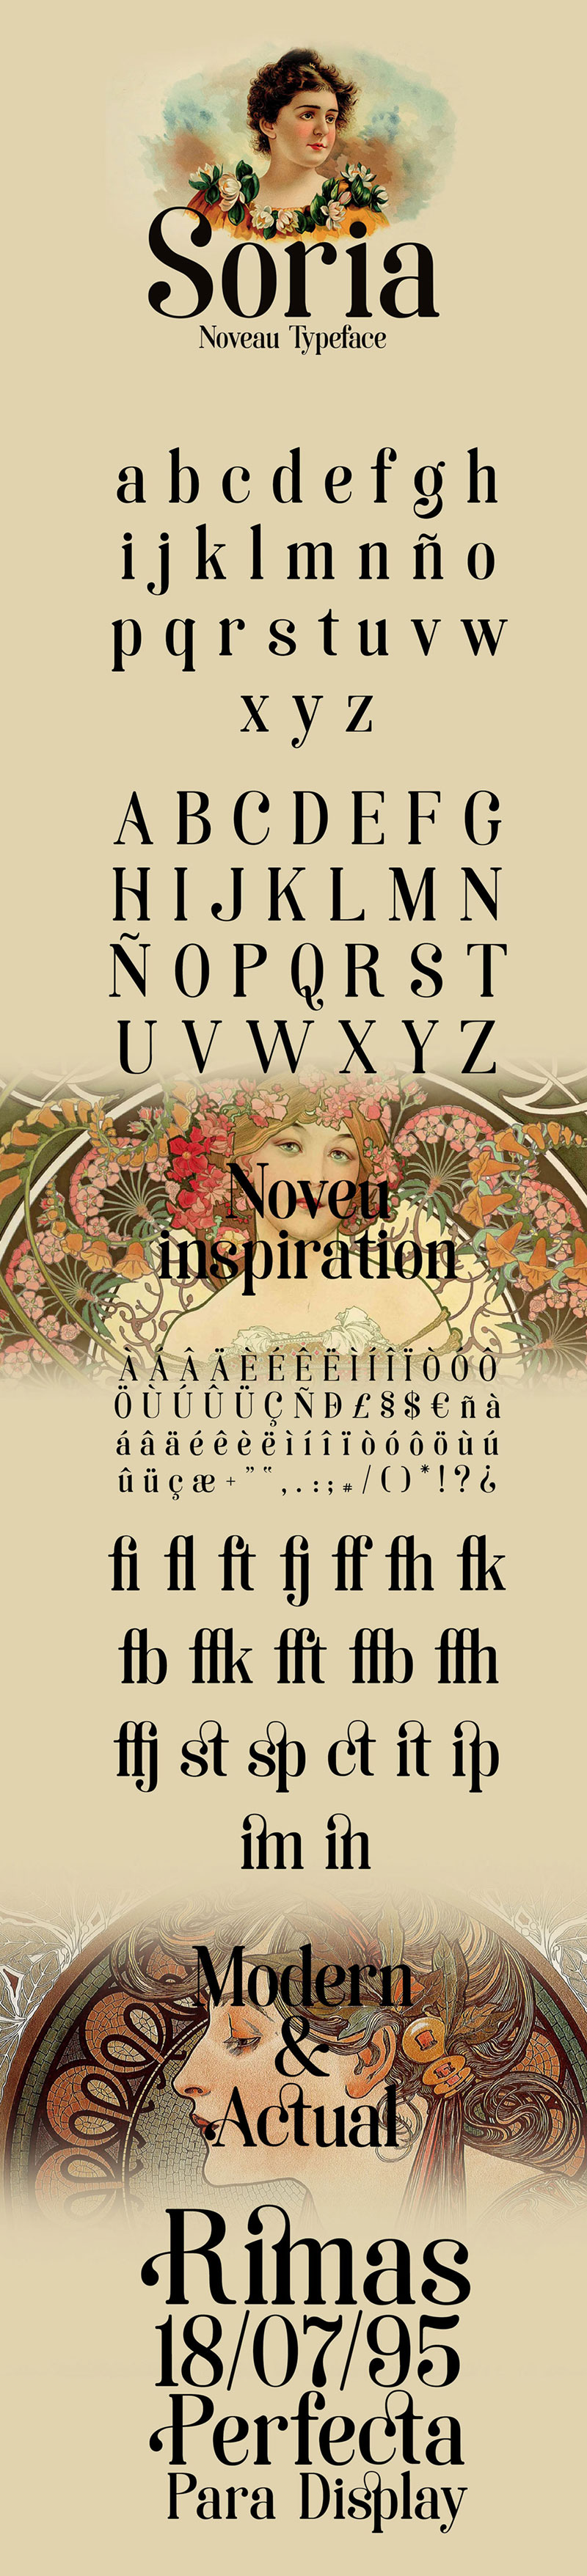 Free Soria Font For Artists